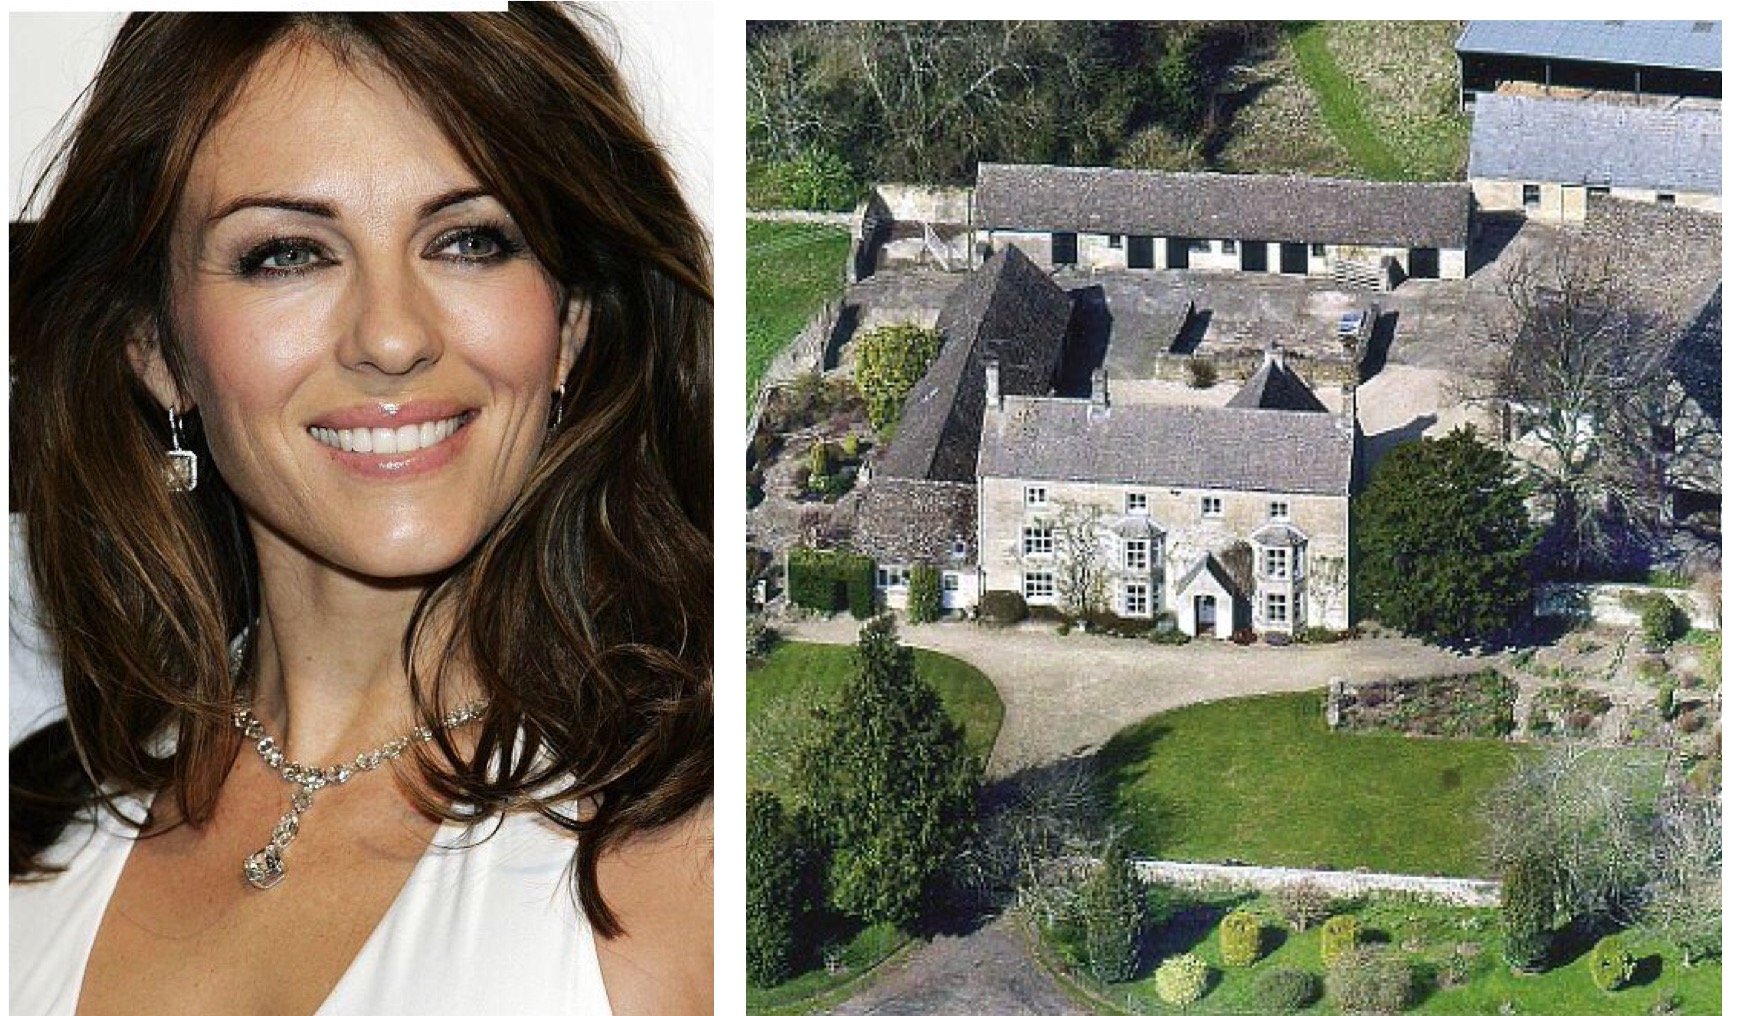 Best deal: Elizabeth Hurley has sold a house with triple benefits